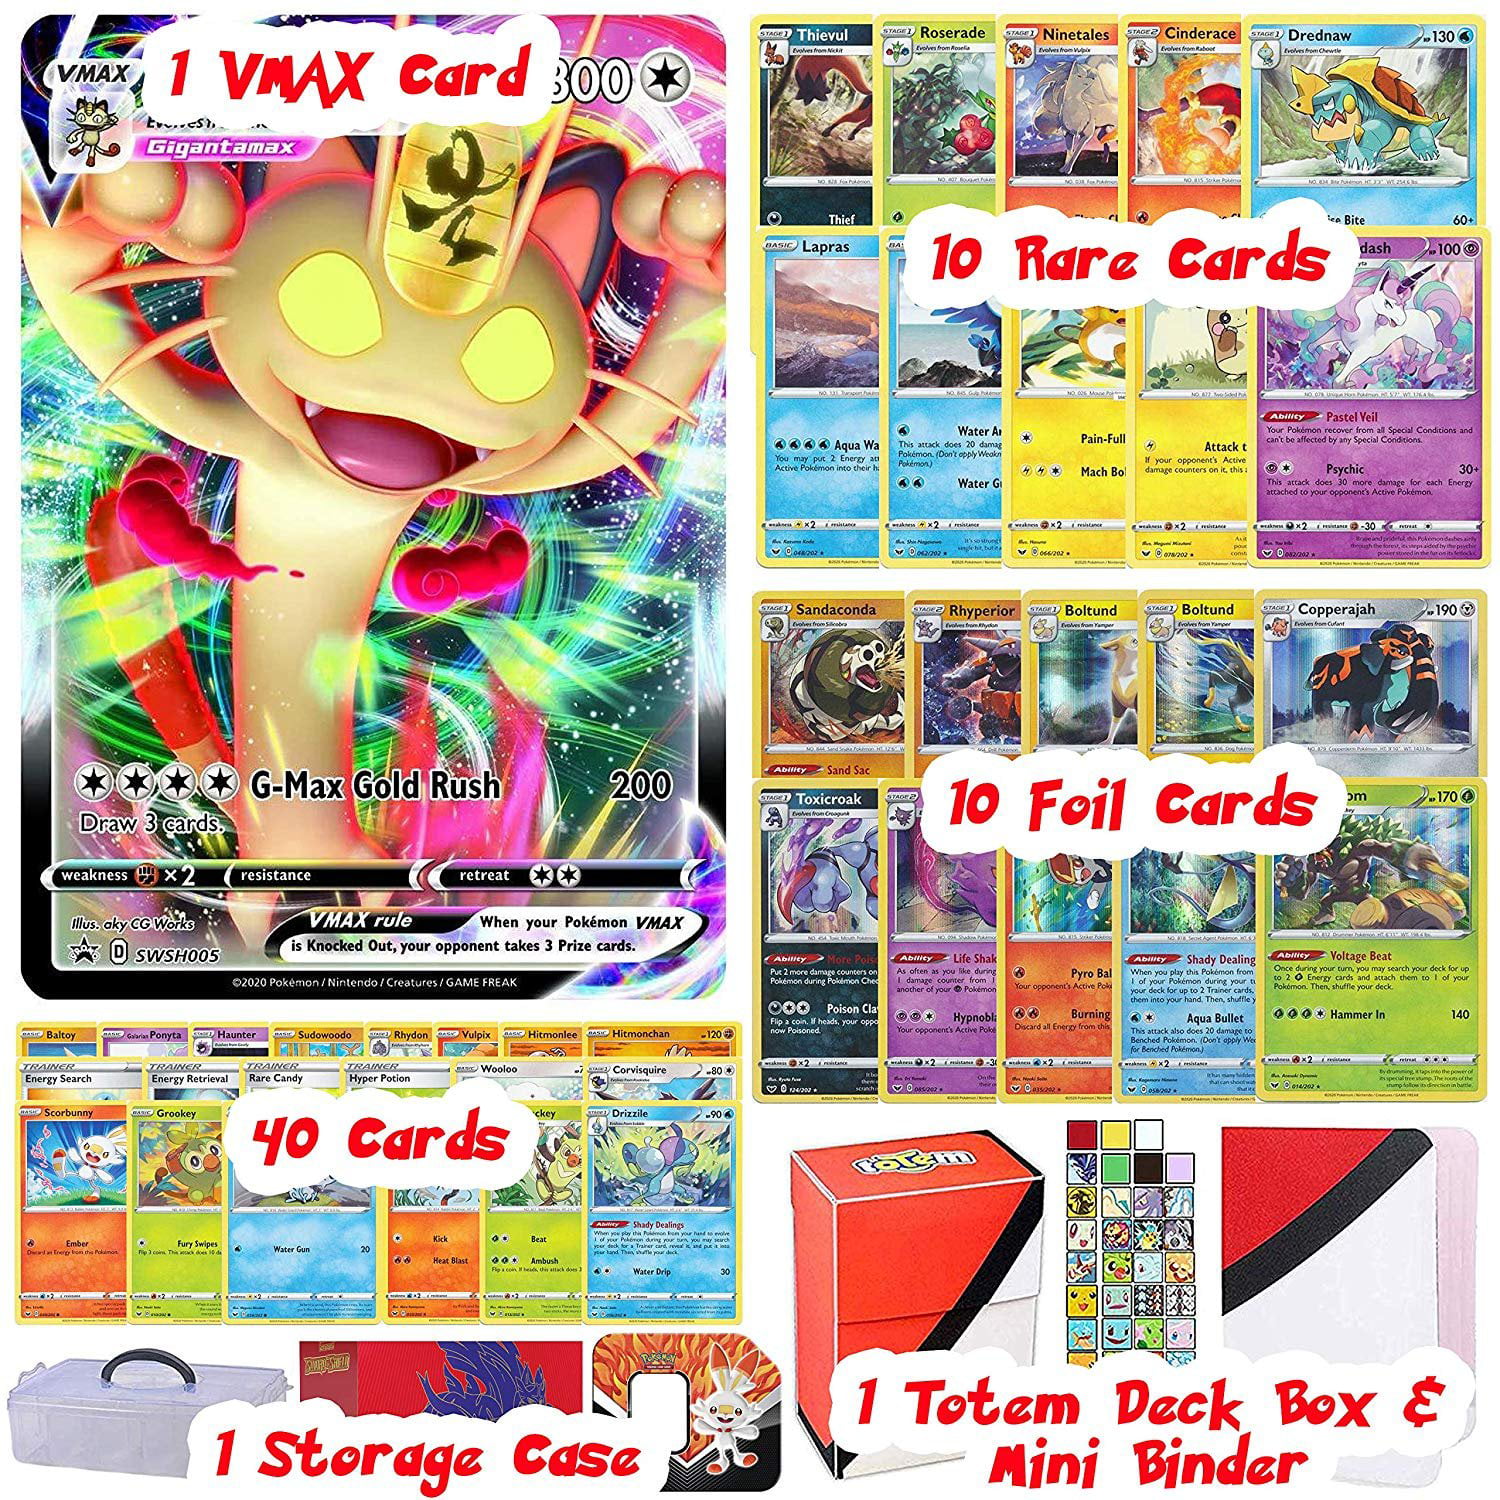 Totem World Sword And Shield Pokemon Vmax Card Ultra Rare Guaranteed With 10 Rares 10 Foil Holo 40 Regular Cards Totem Deck Box Mini Binder Collectors Album In A Storage Case Tin